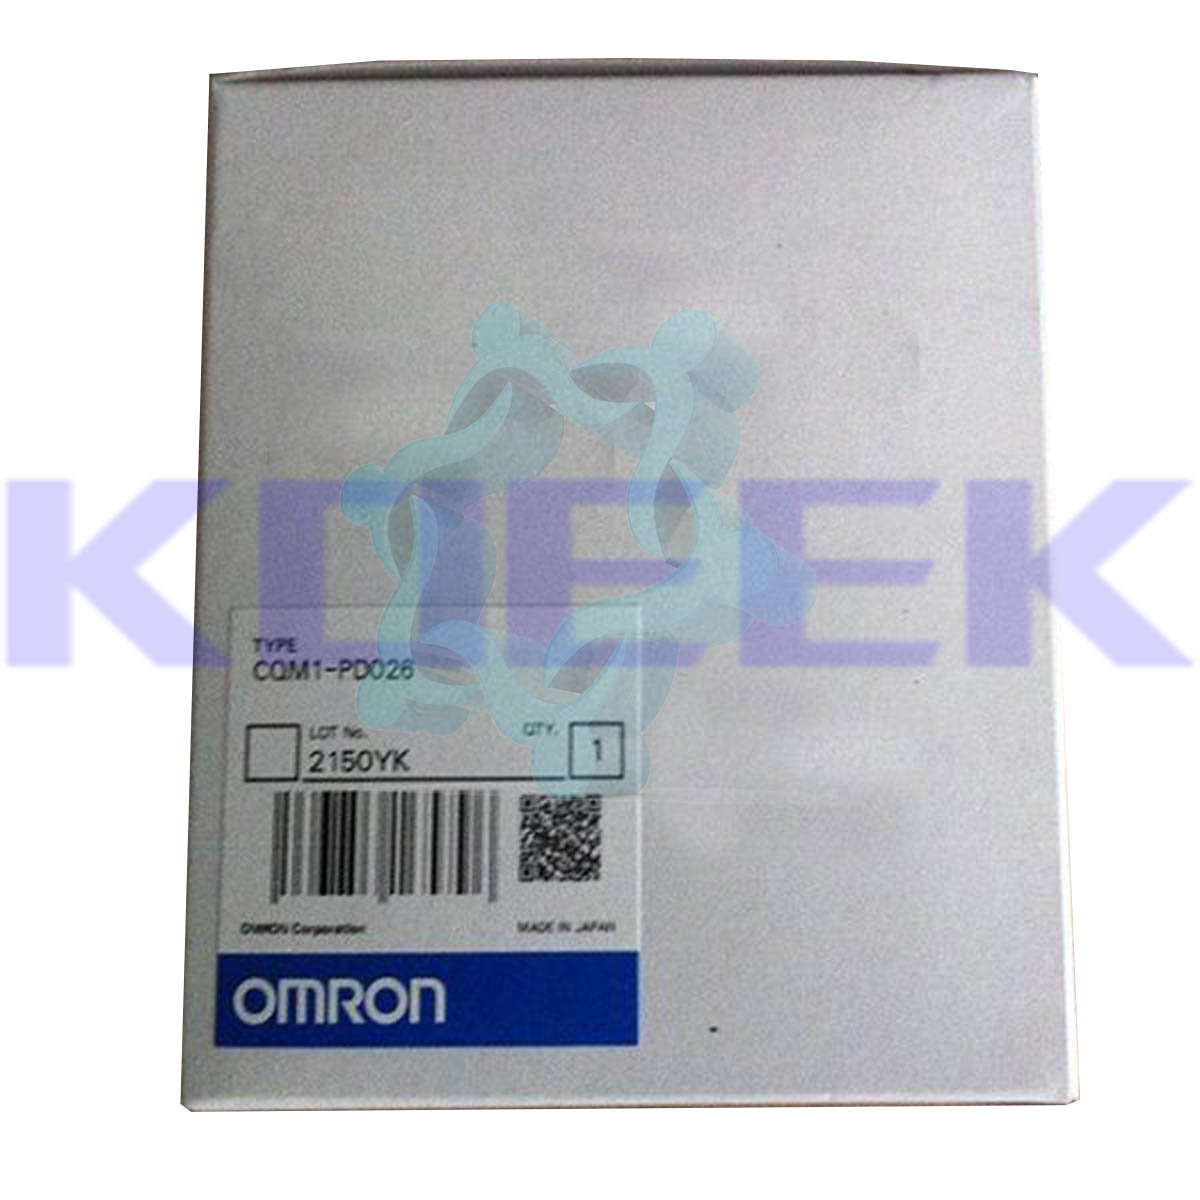 CQM1-PD026 KOEED 201-500, 80%, import_2020_10_10_031751, Omron, Other